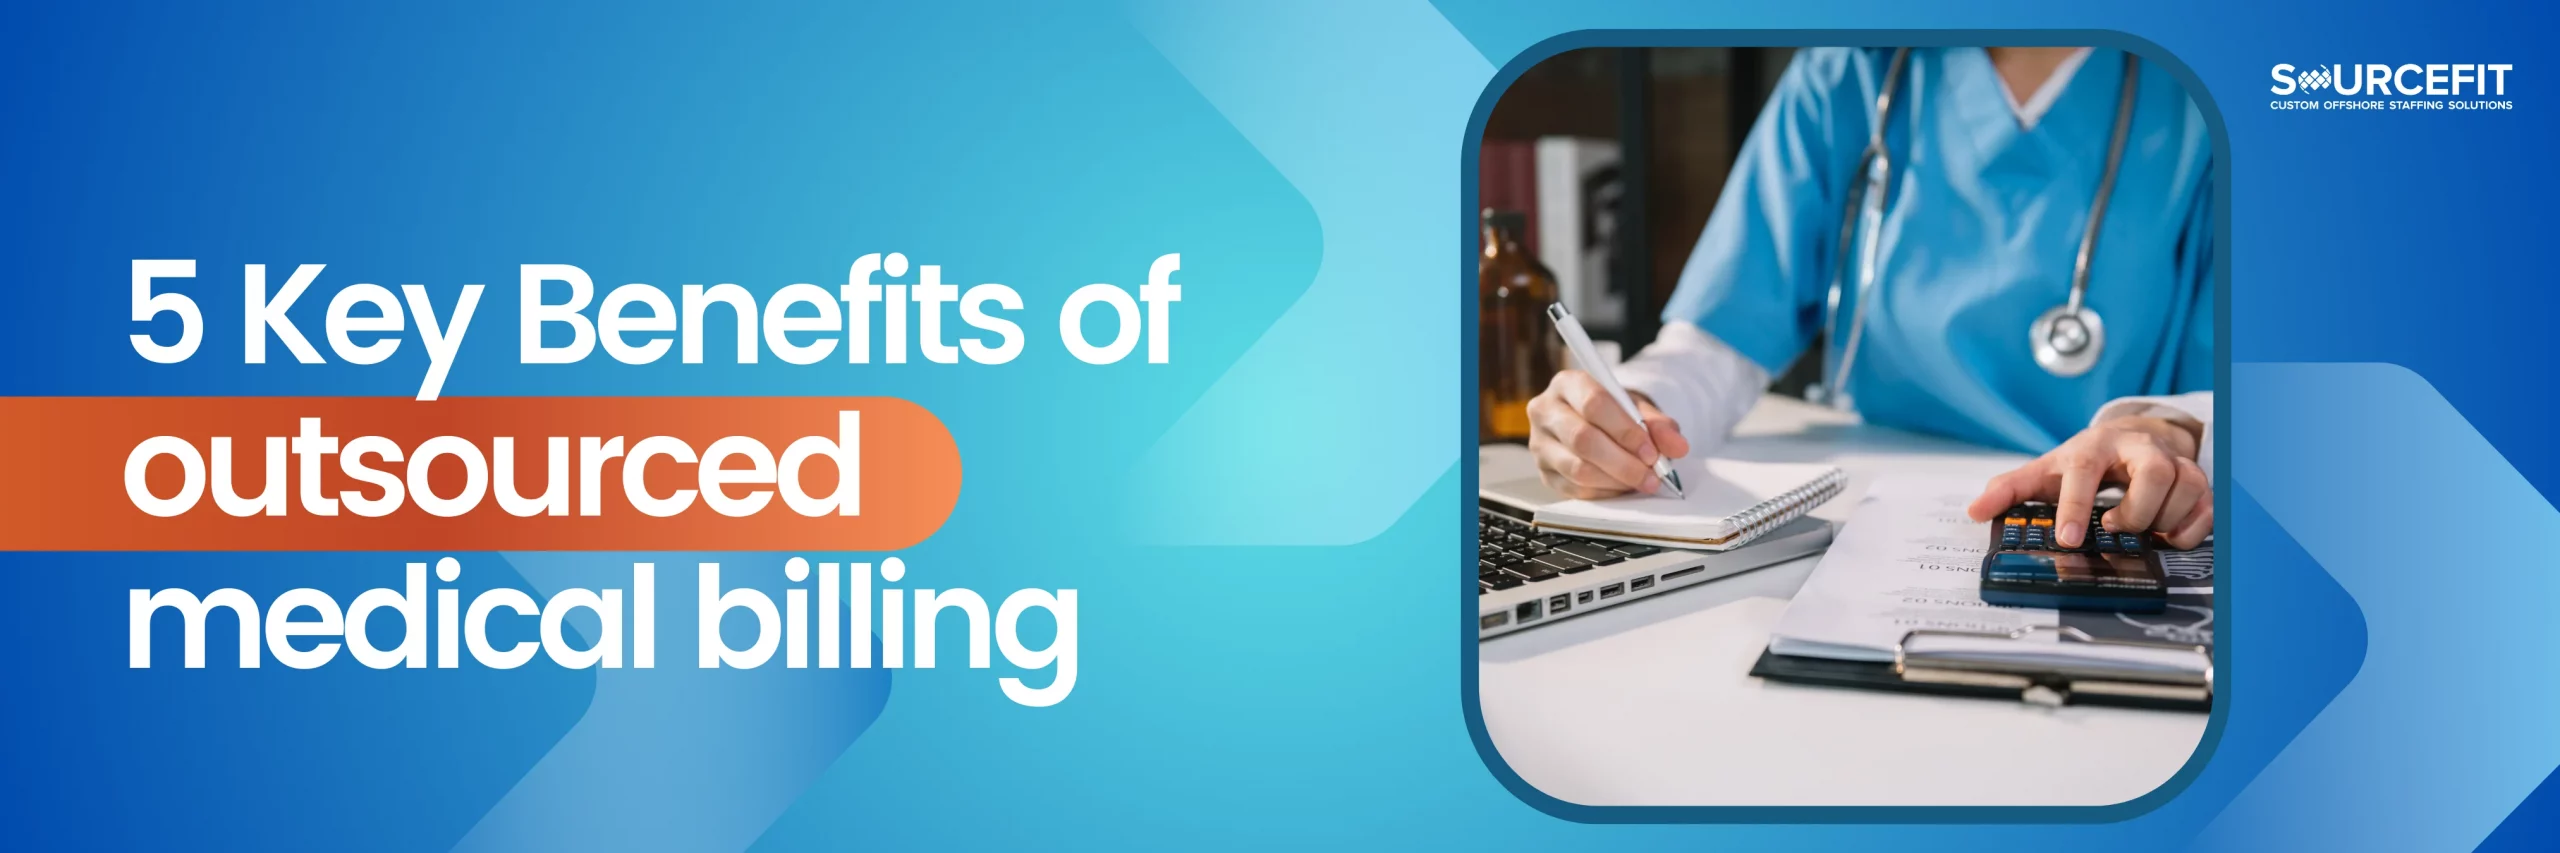 5-Key-Benefits-of-outsourced-medical-billing_1200x628-2